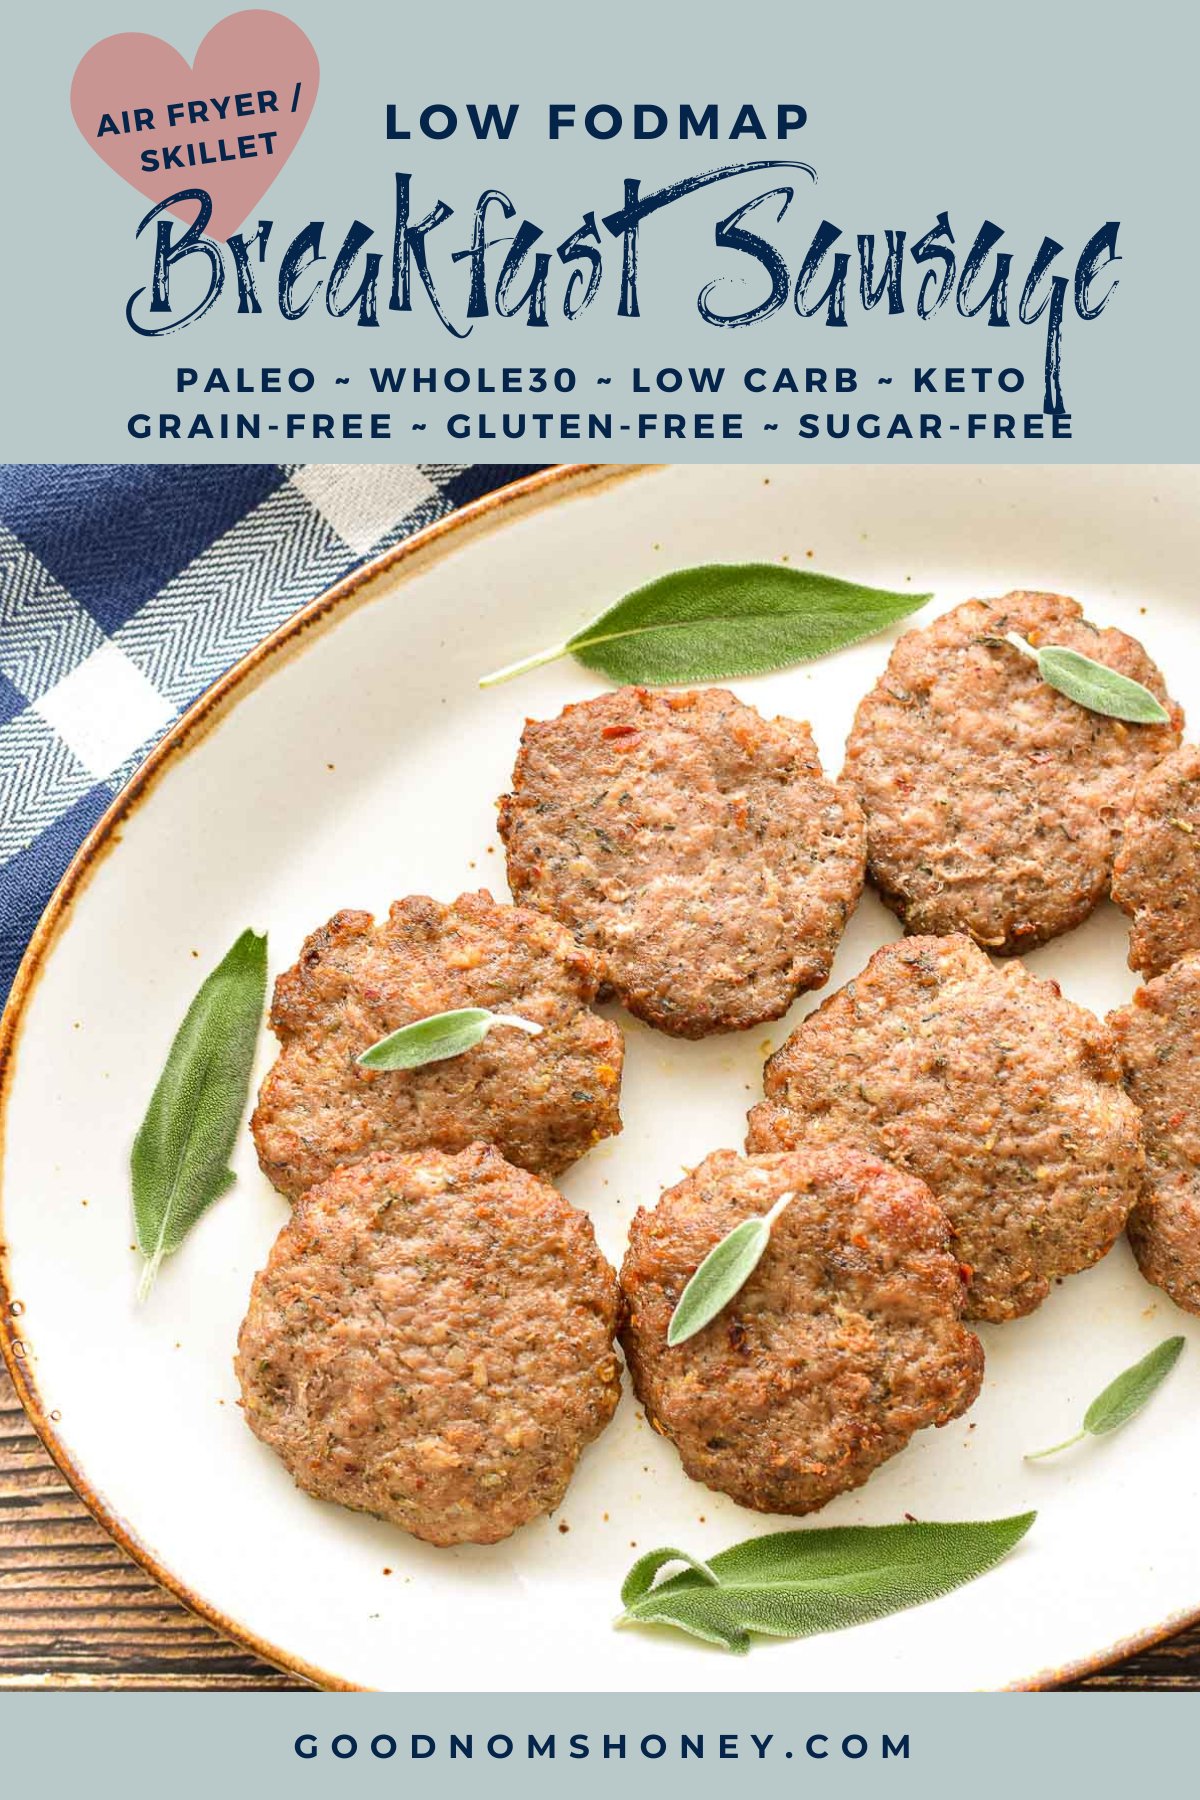 pinterest image with low fodmap air fryer / skillet breakfast sausage paleo whole30 low carb keto grain-free gluten-free sugar-free at the top and goodnomshoney.com at the bottom